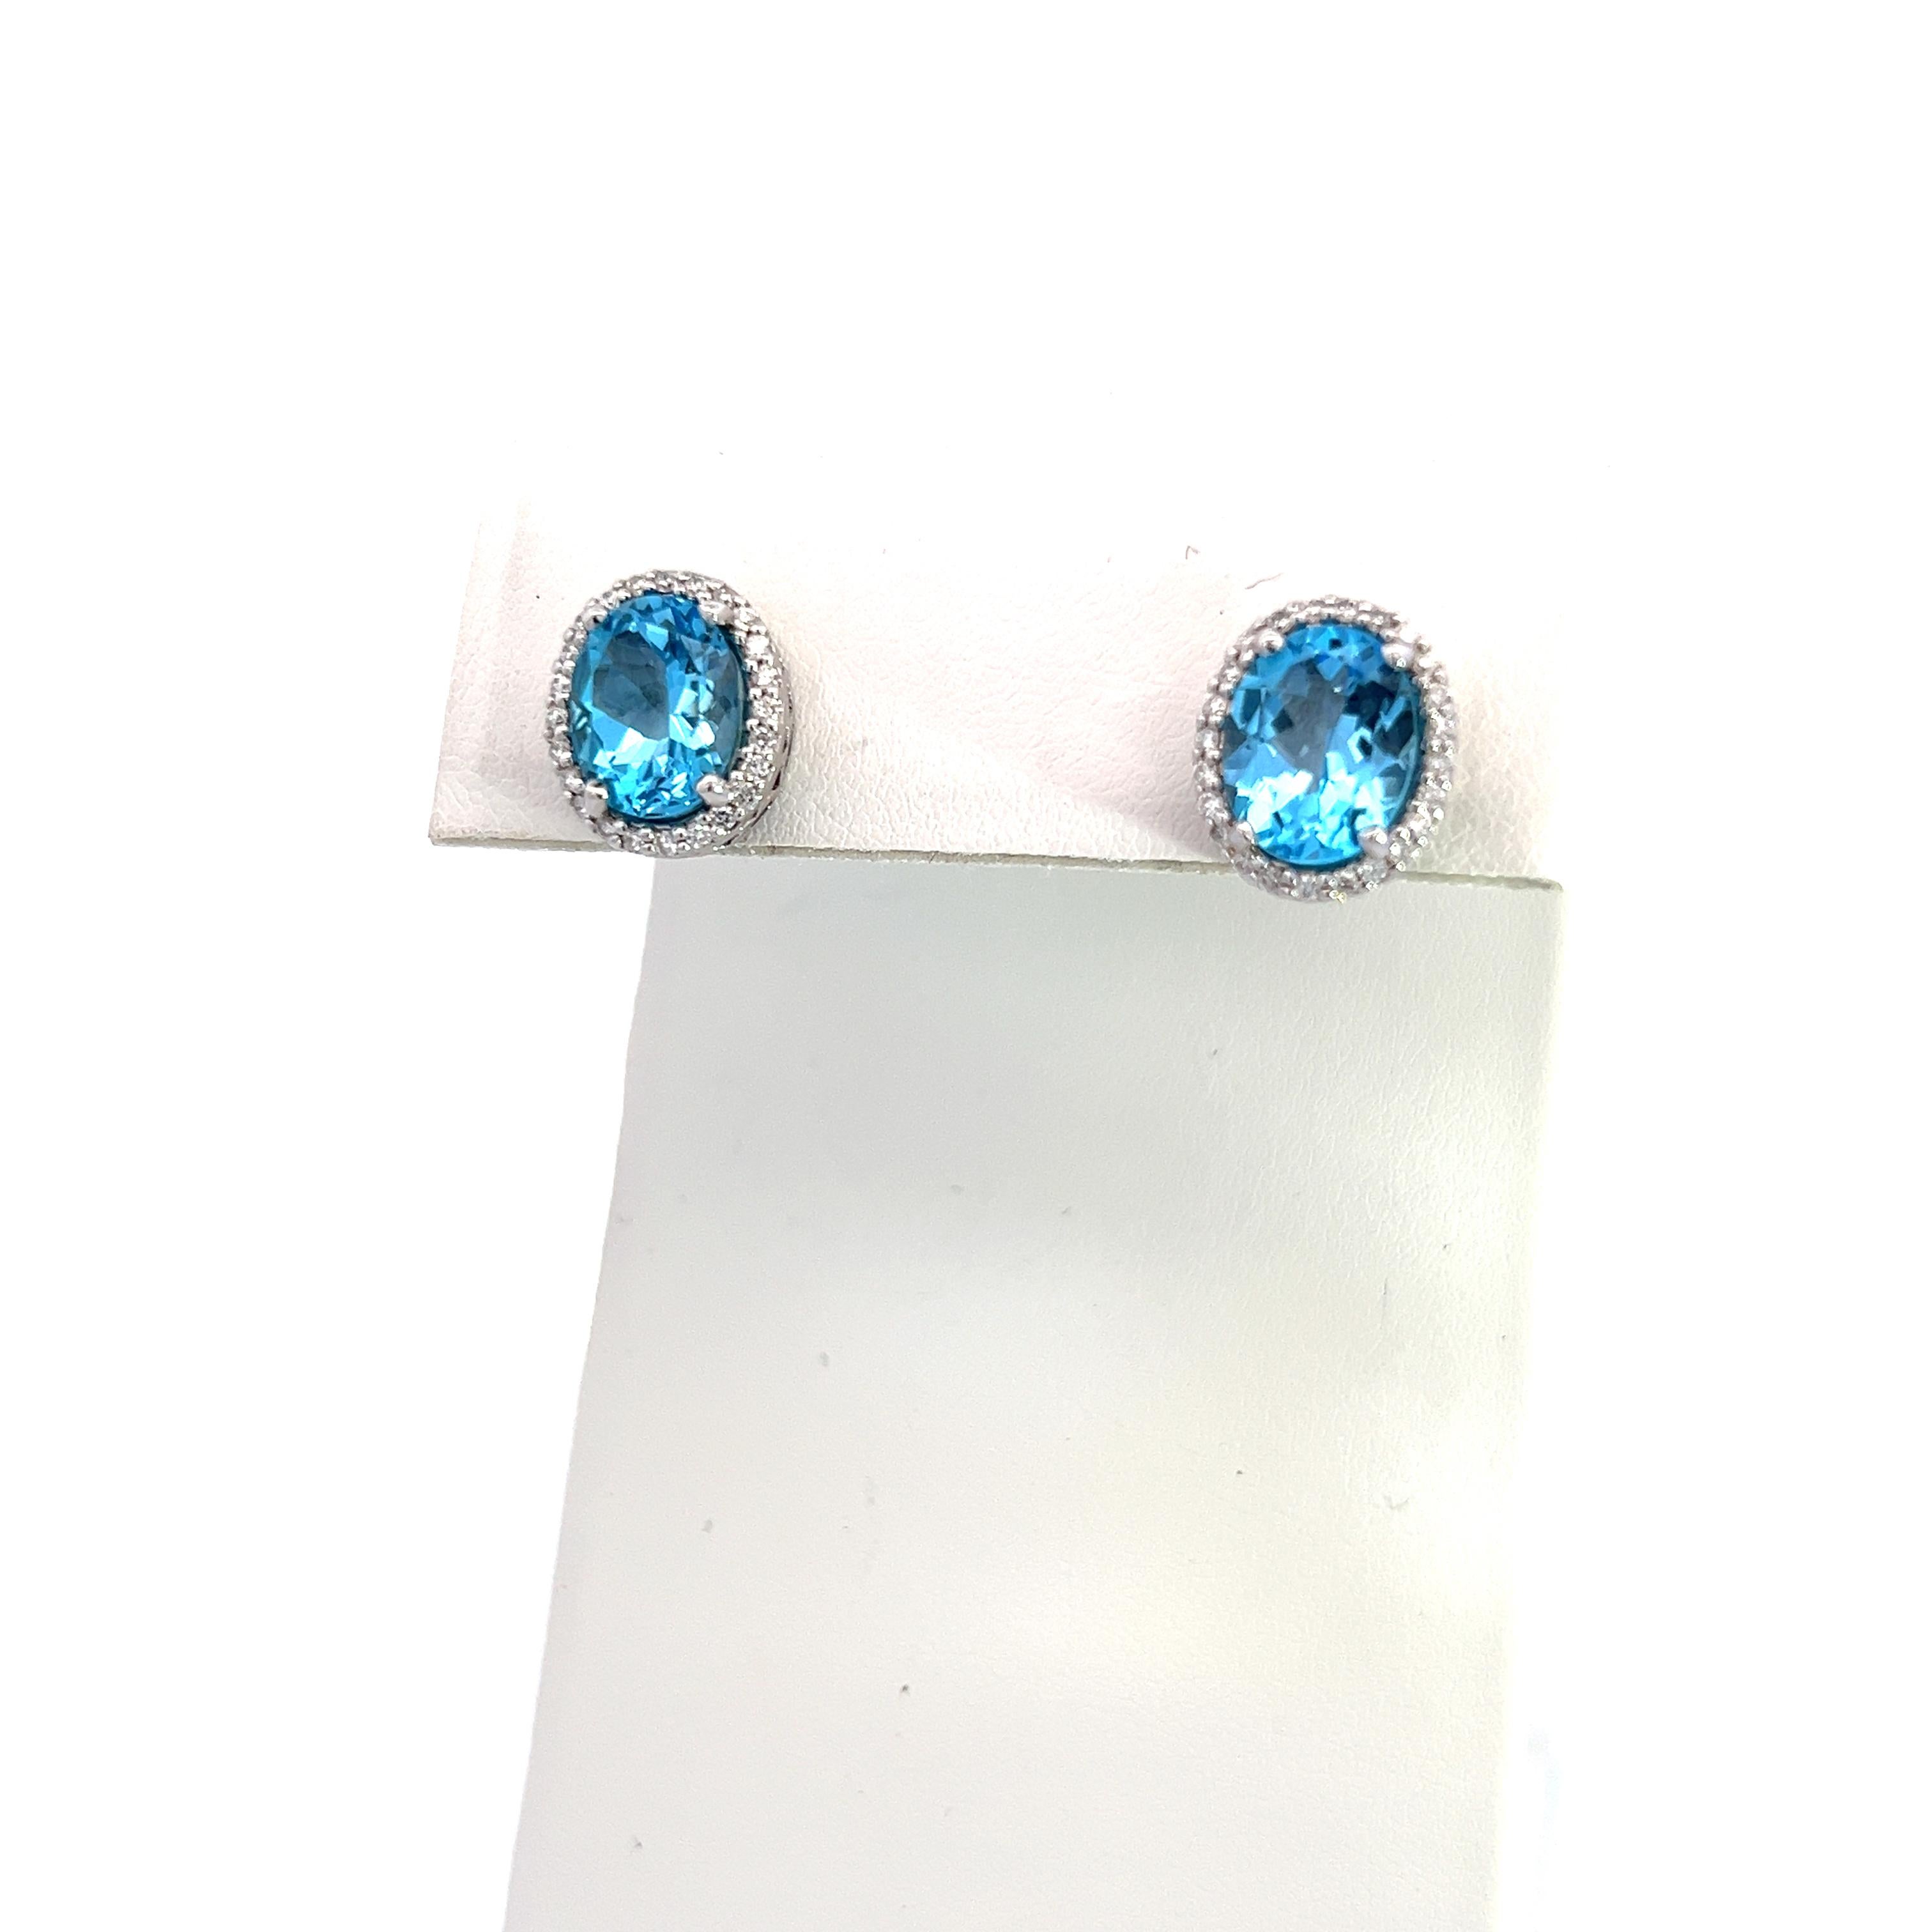 Natural Topaz Diamond Stud Earrings 14k W Gold 6.98 TCW Certified In New Condition For Sale In Brooklyn, NY